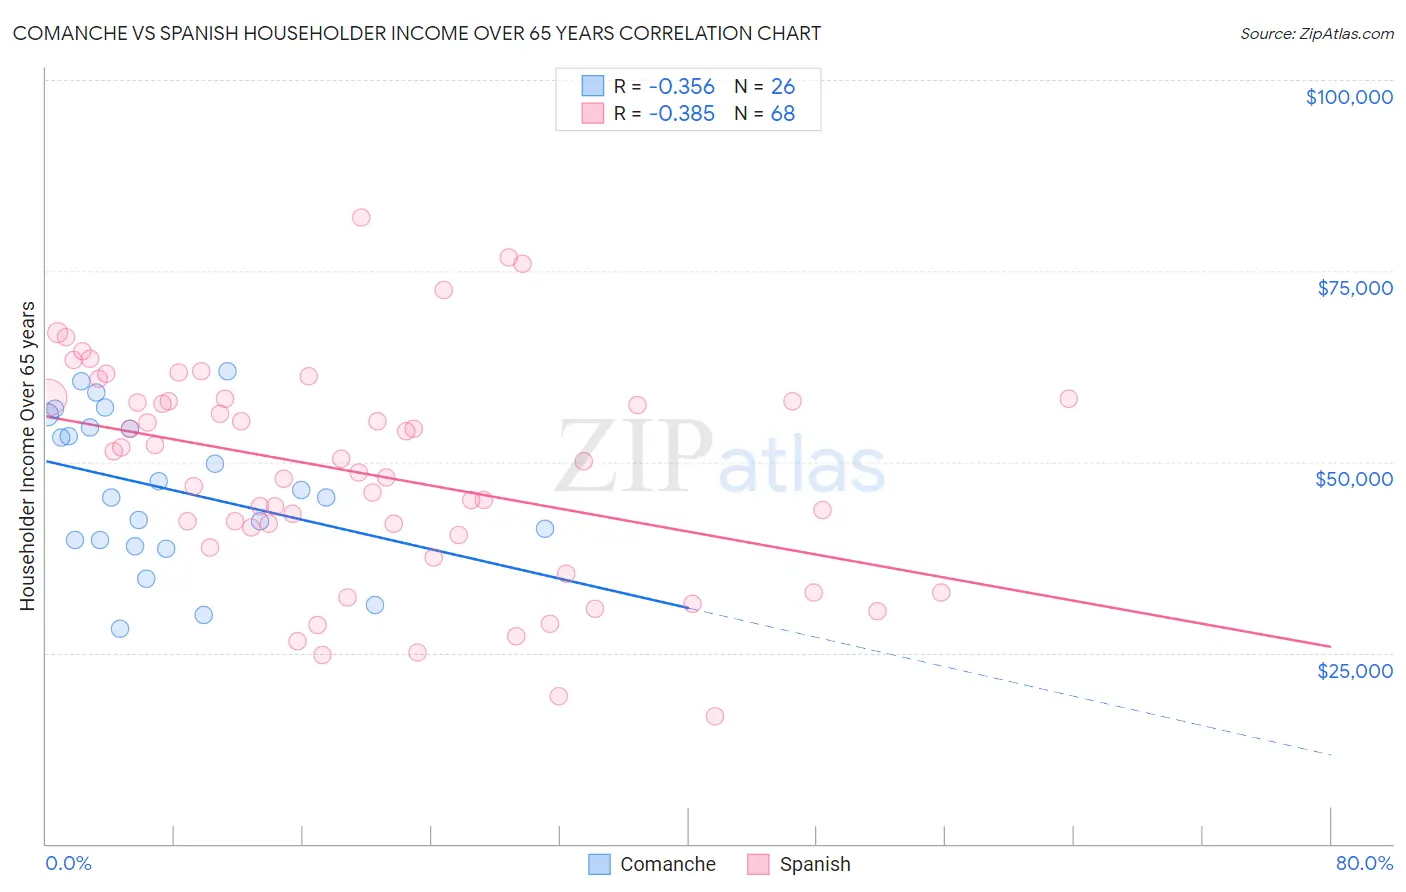 Comanche vs Spanish Householder Income Over 65 years